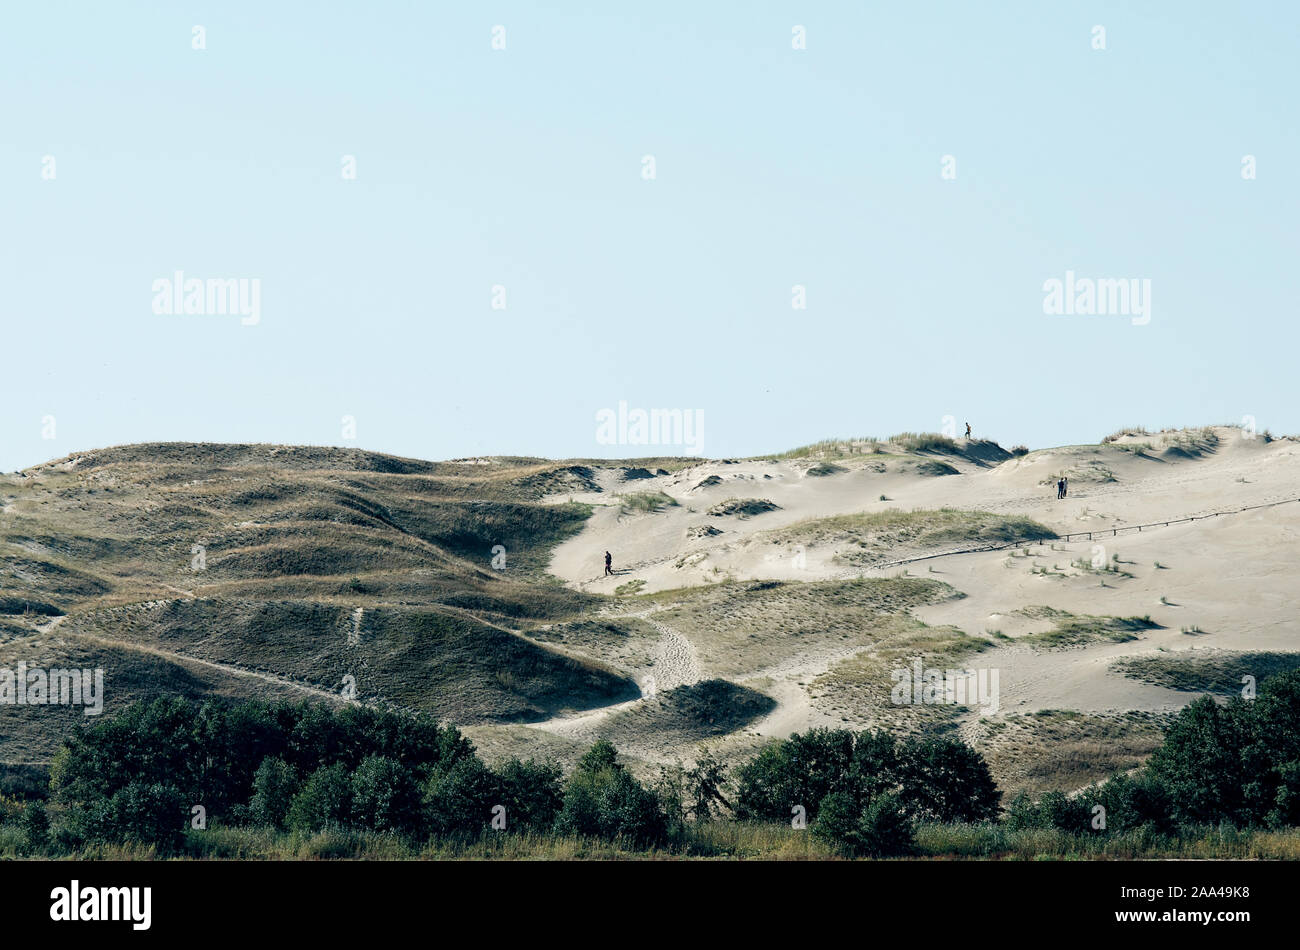 Five People walking on a sand dune, Curonian Spit, Neringa, Lithuania Stock Photo